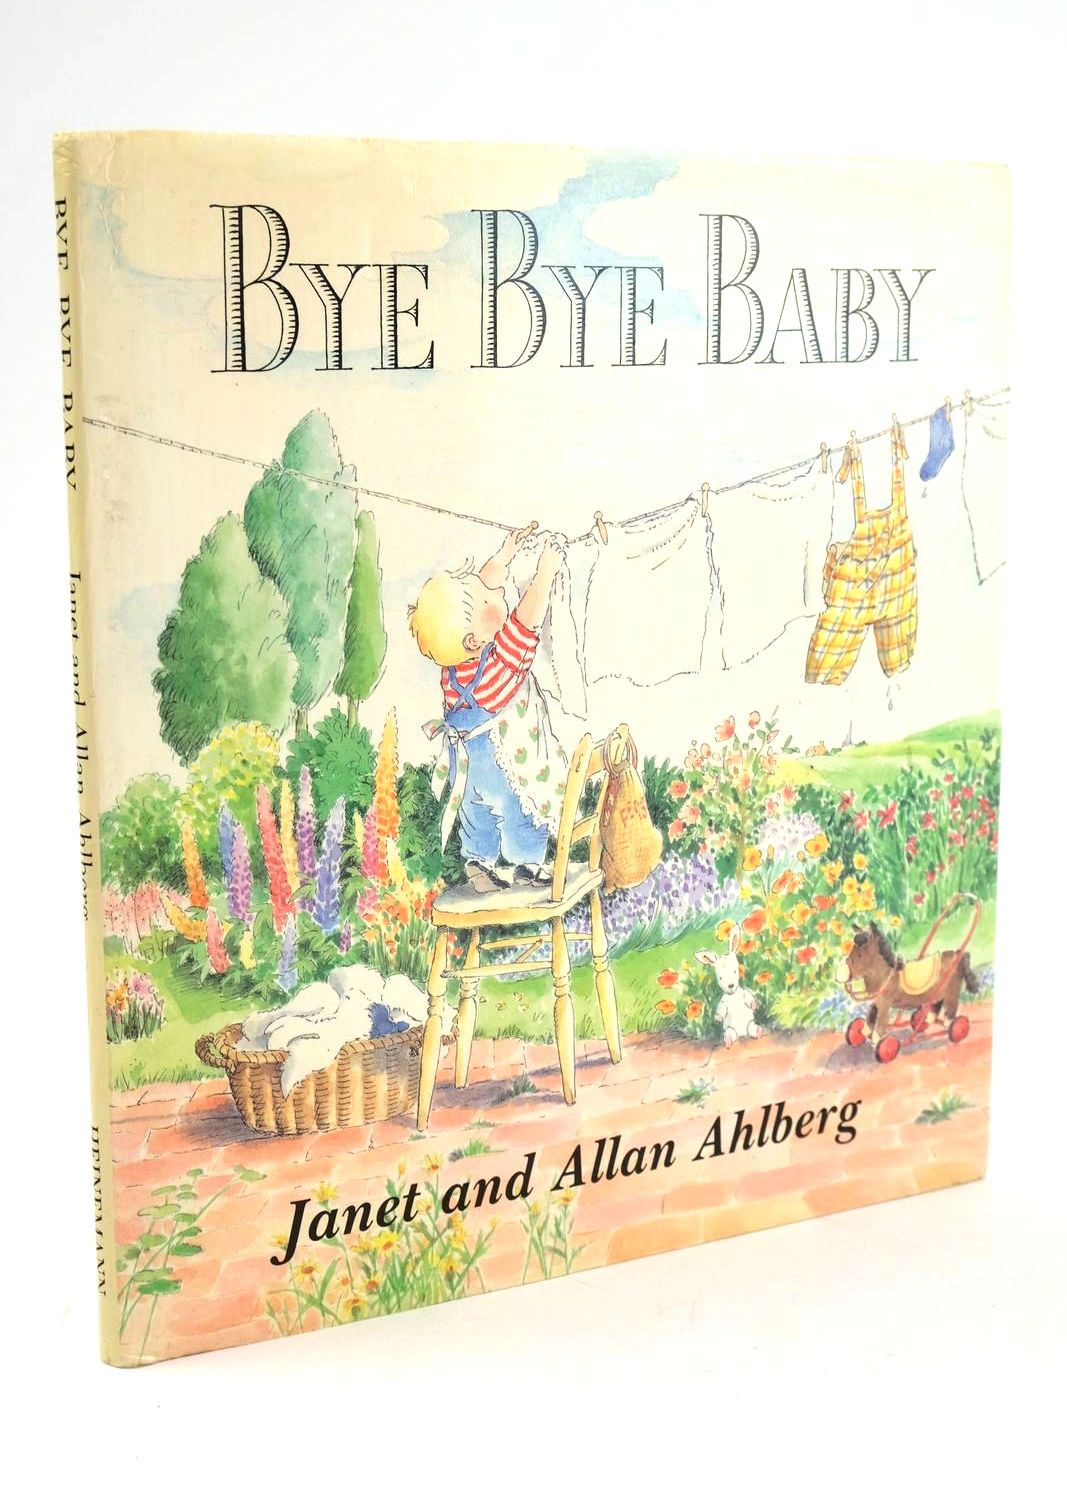 Photo of BYE BYE BABY written by Ahlberg, Allan illustrated by Ahlberg, Janet published by Heinemann (STOCK CODE: 1325059)  for sale by Stella & Rose's Books